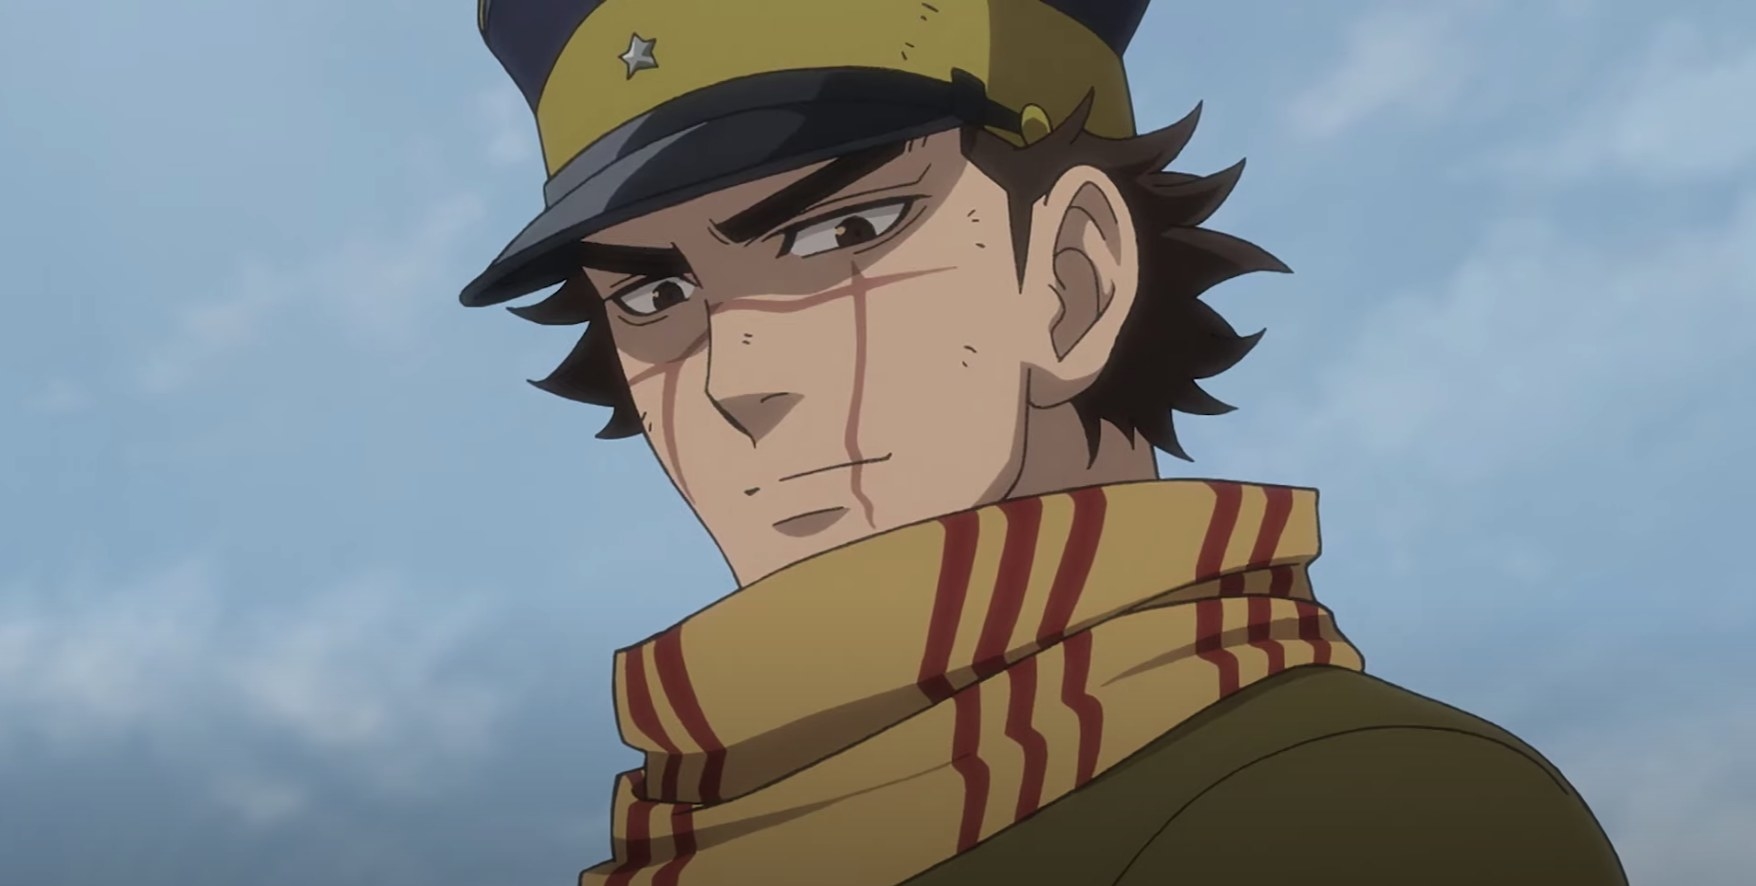 The main character of Golden Kamuy